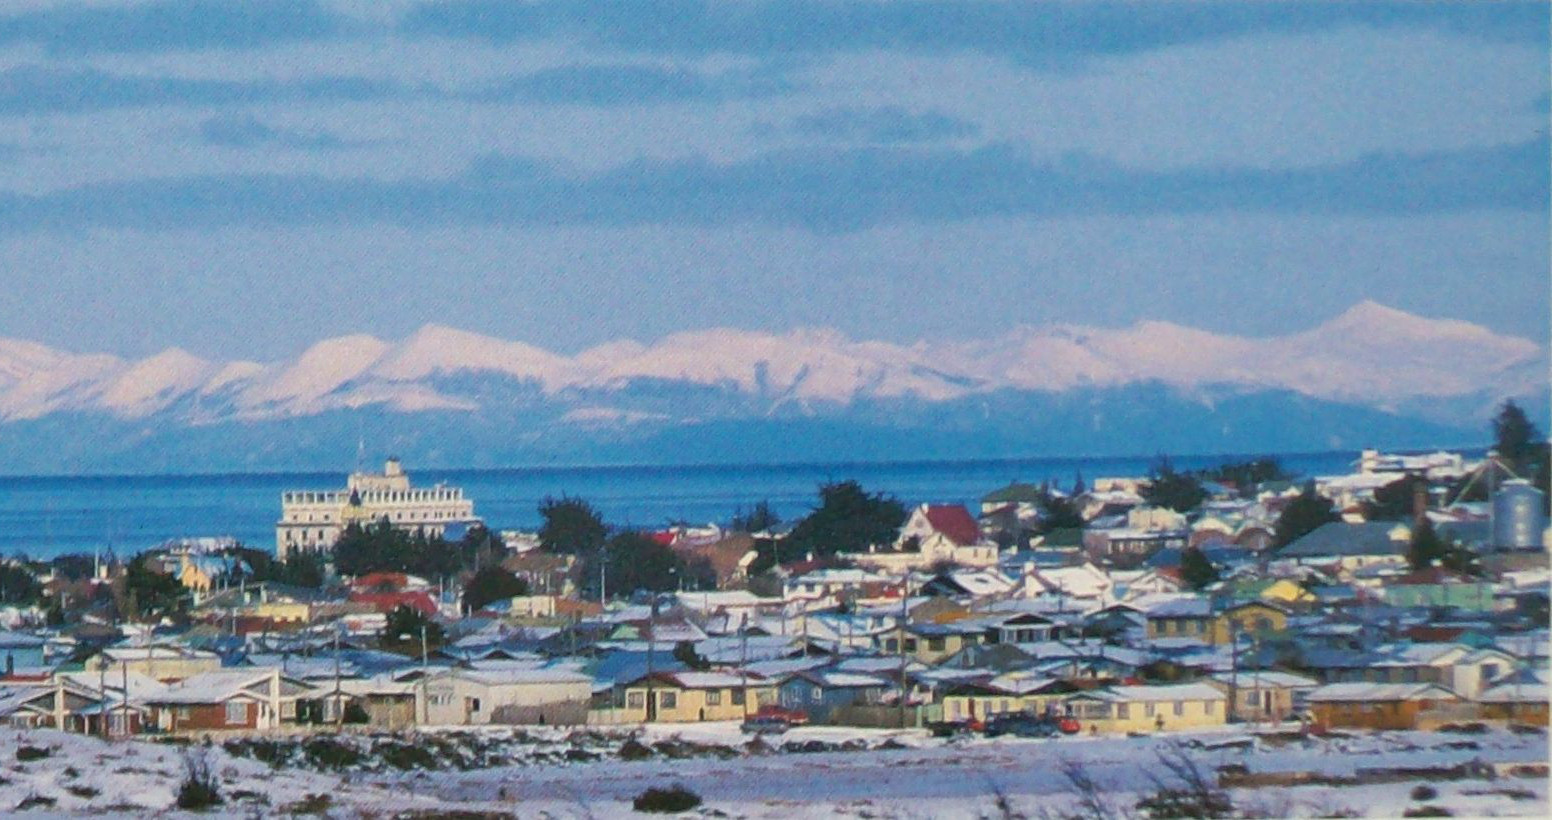 A view over the snowy rooftops of Punta Arenas, Chile, with mountains in the background